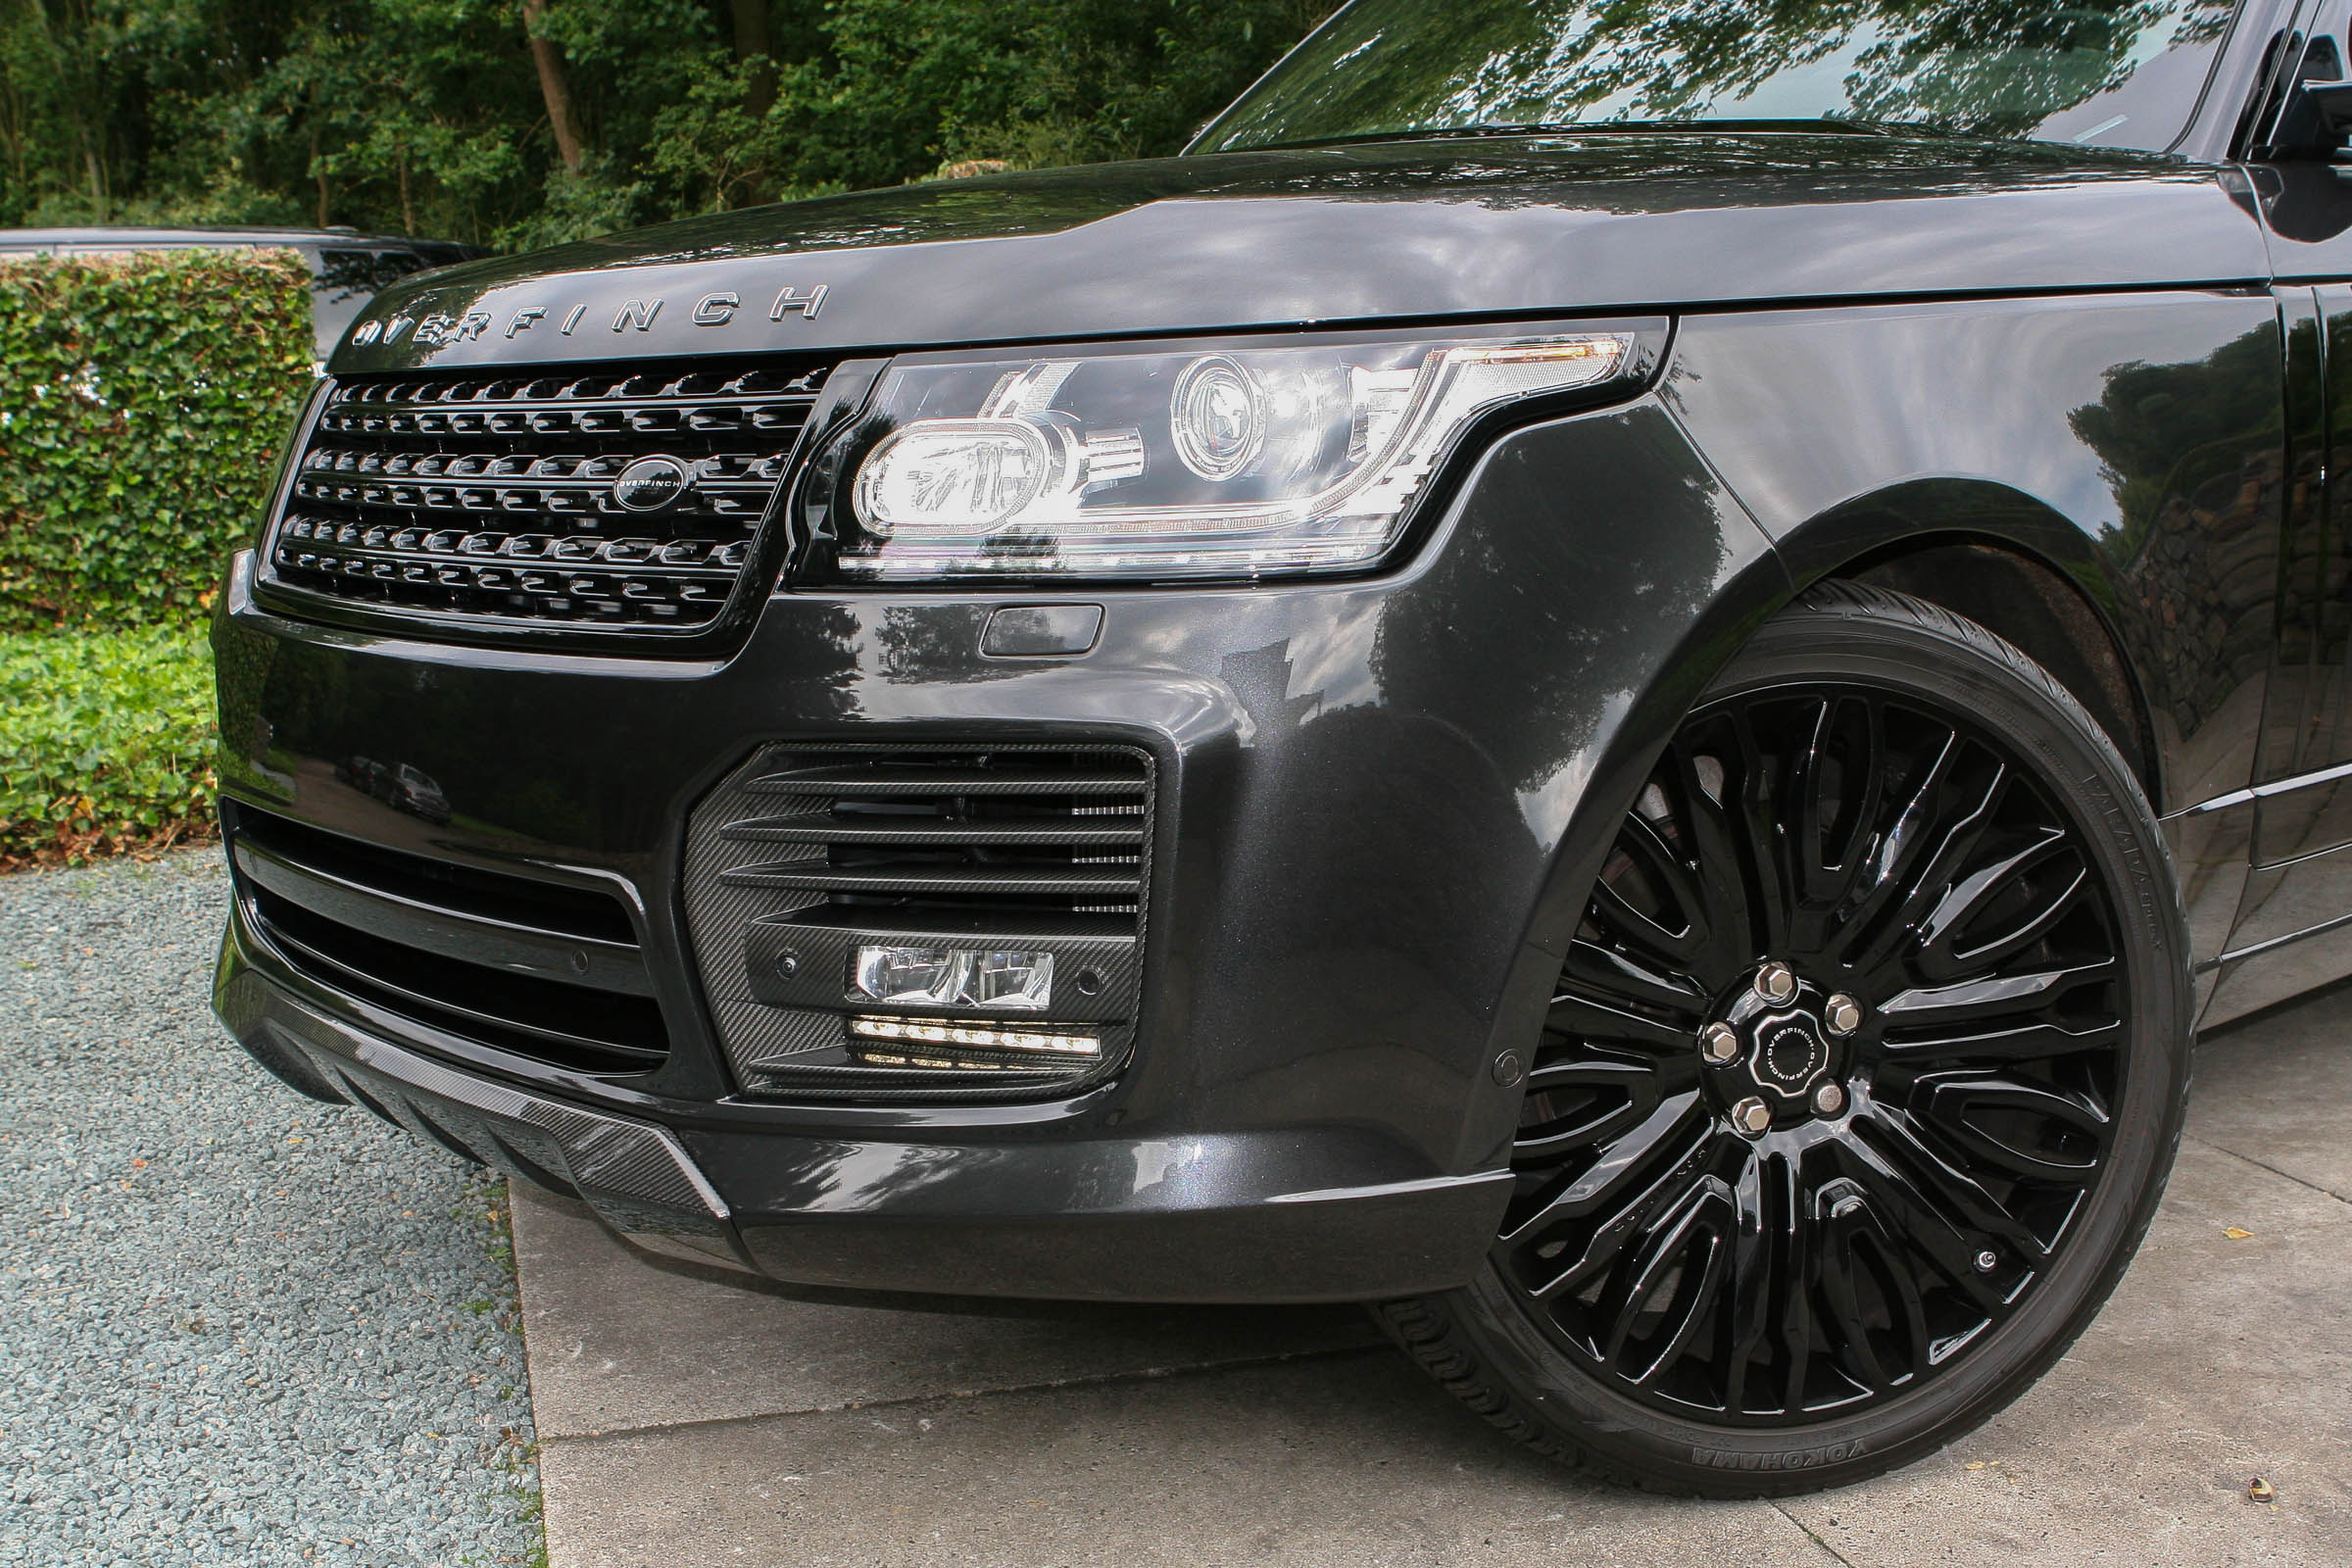 Overfinch Range Rover Supercharged 2015